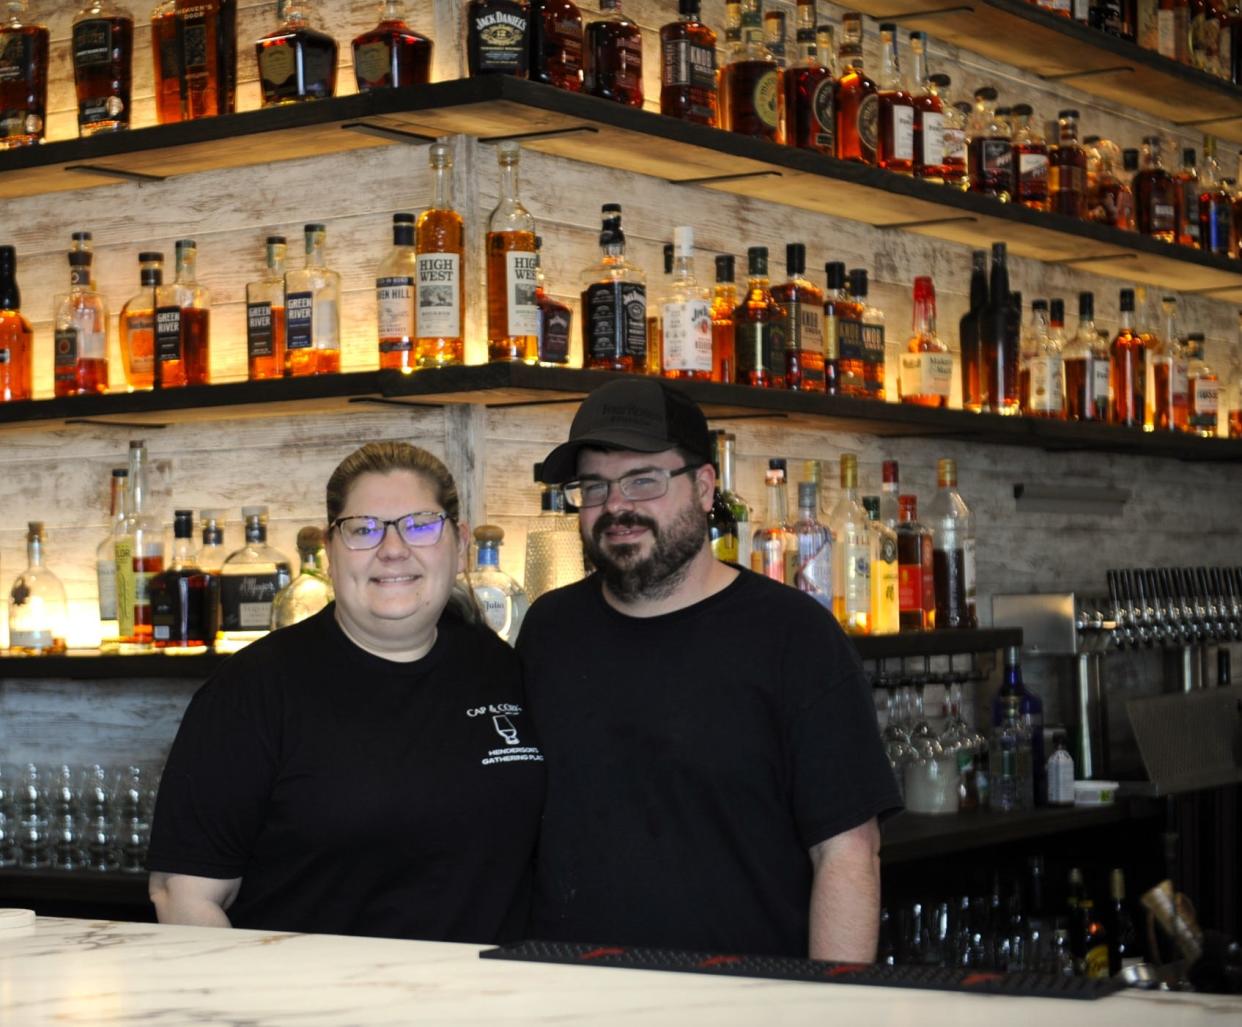 Danielle and Michael Ervin are two of six co-owners of Cap & Cork. Danielle does the marketing and handles front of house operations while Michael is the executive chef.